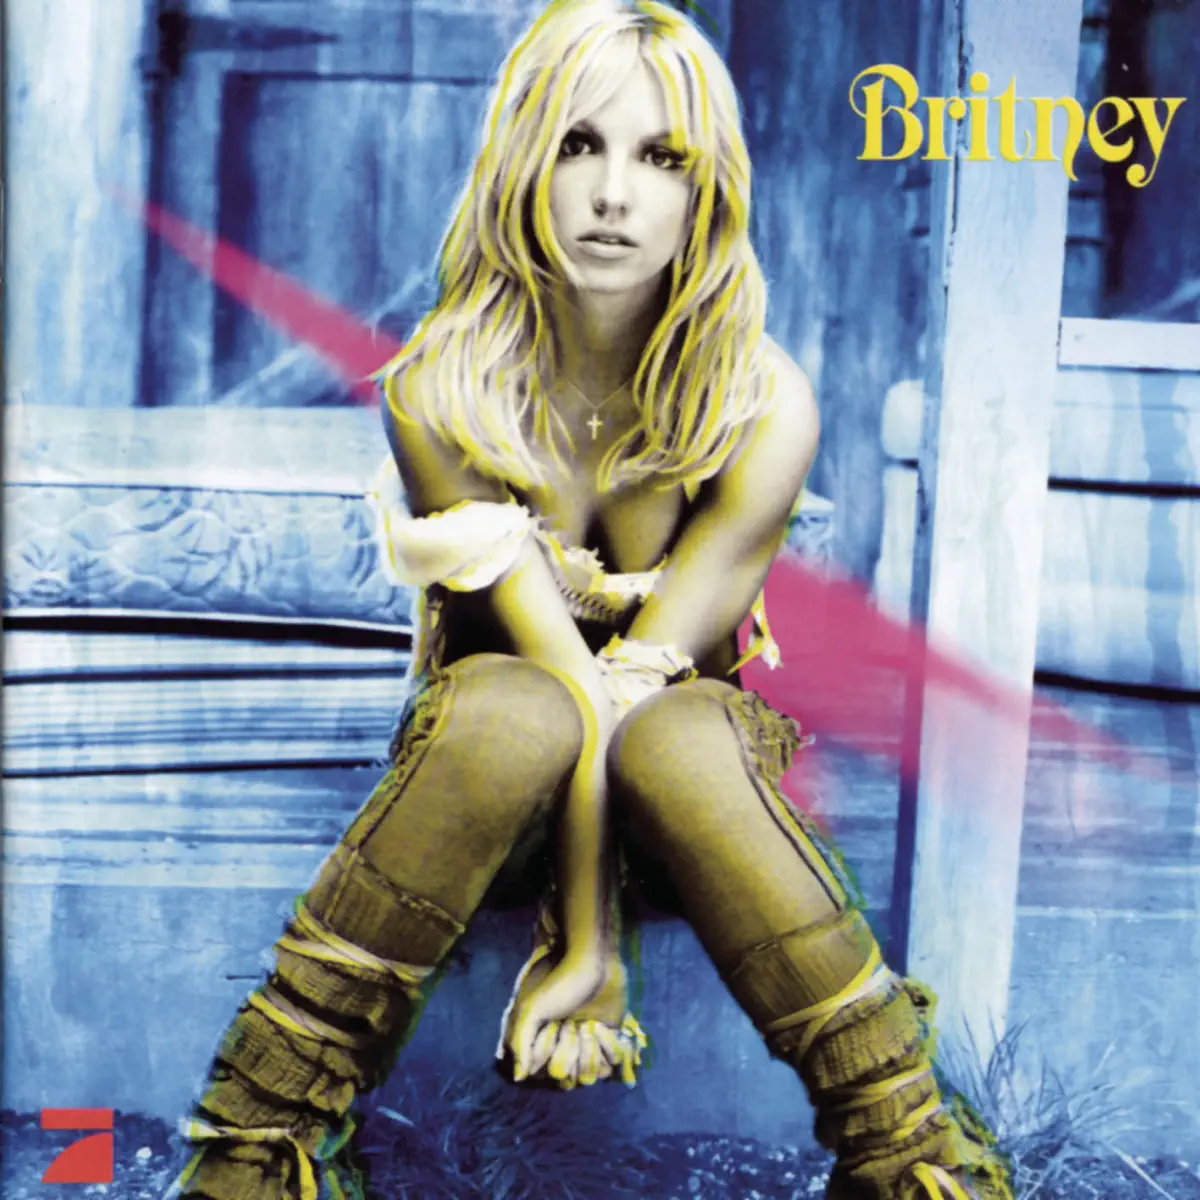 Britney Spears - Britney (2001) [iTunes Plus AAC M4A]-新房子